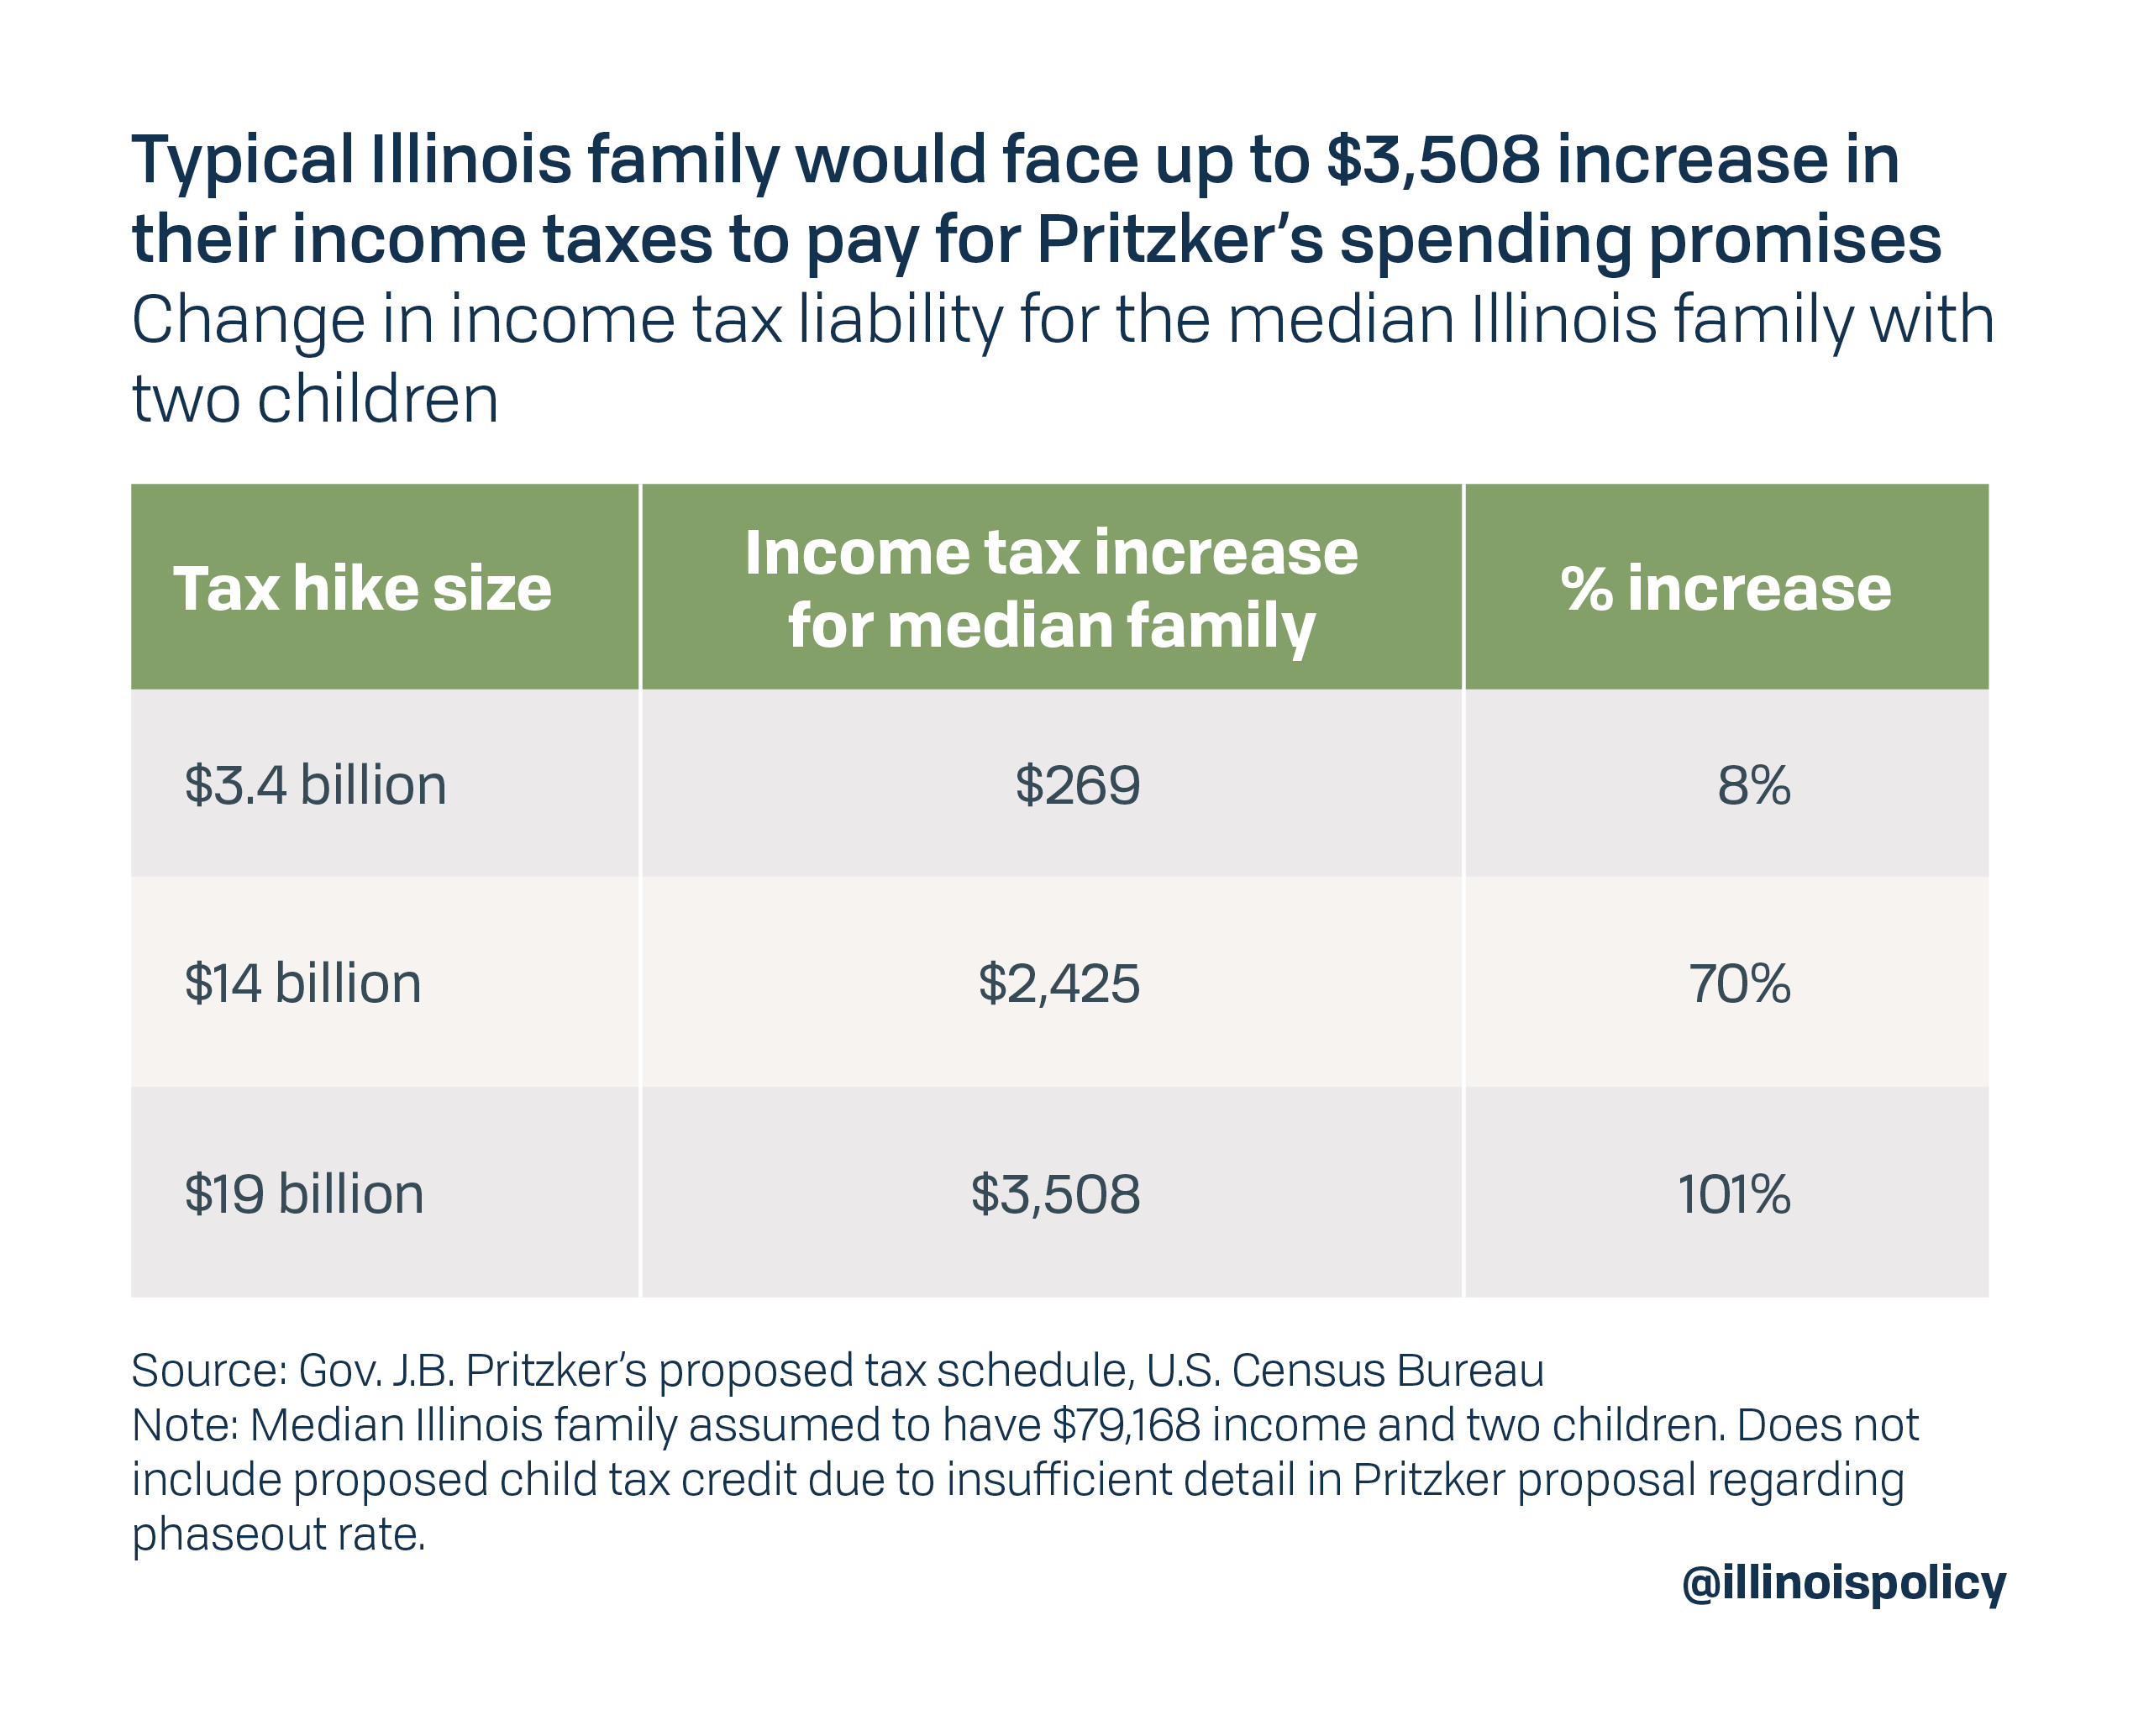 Typical Illinois family would face up to $3,508 increase in their income taxes to pay for Pritzker's spending promises